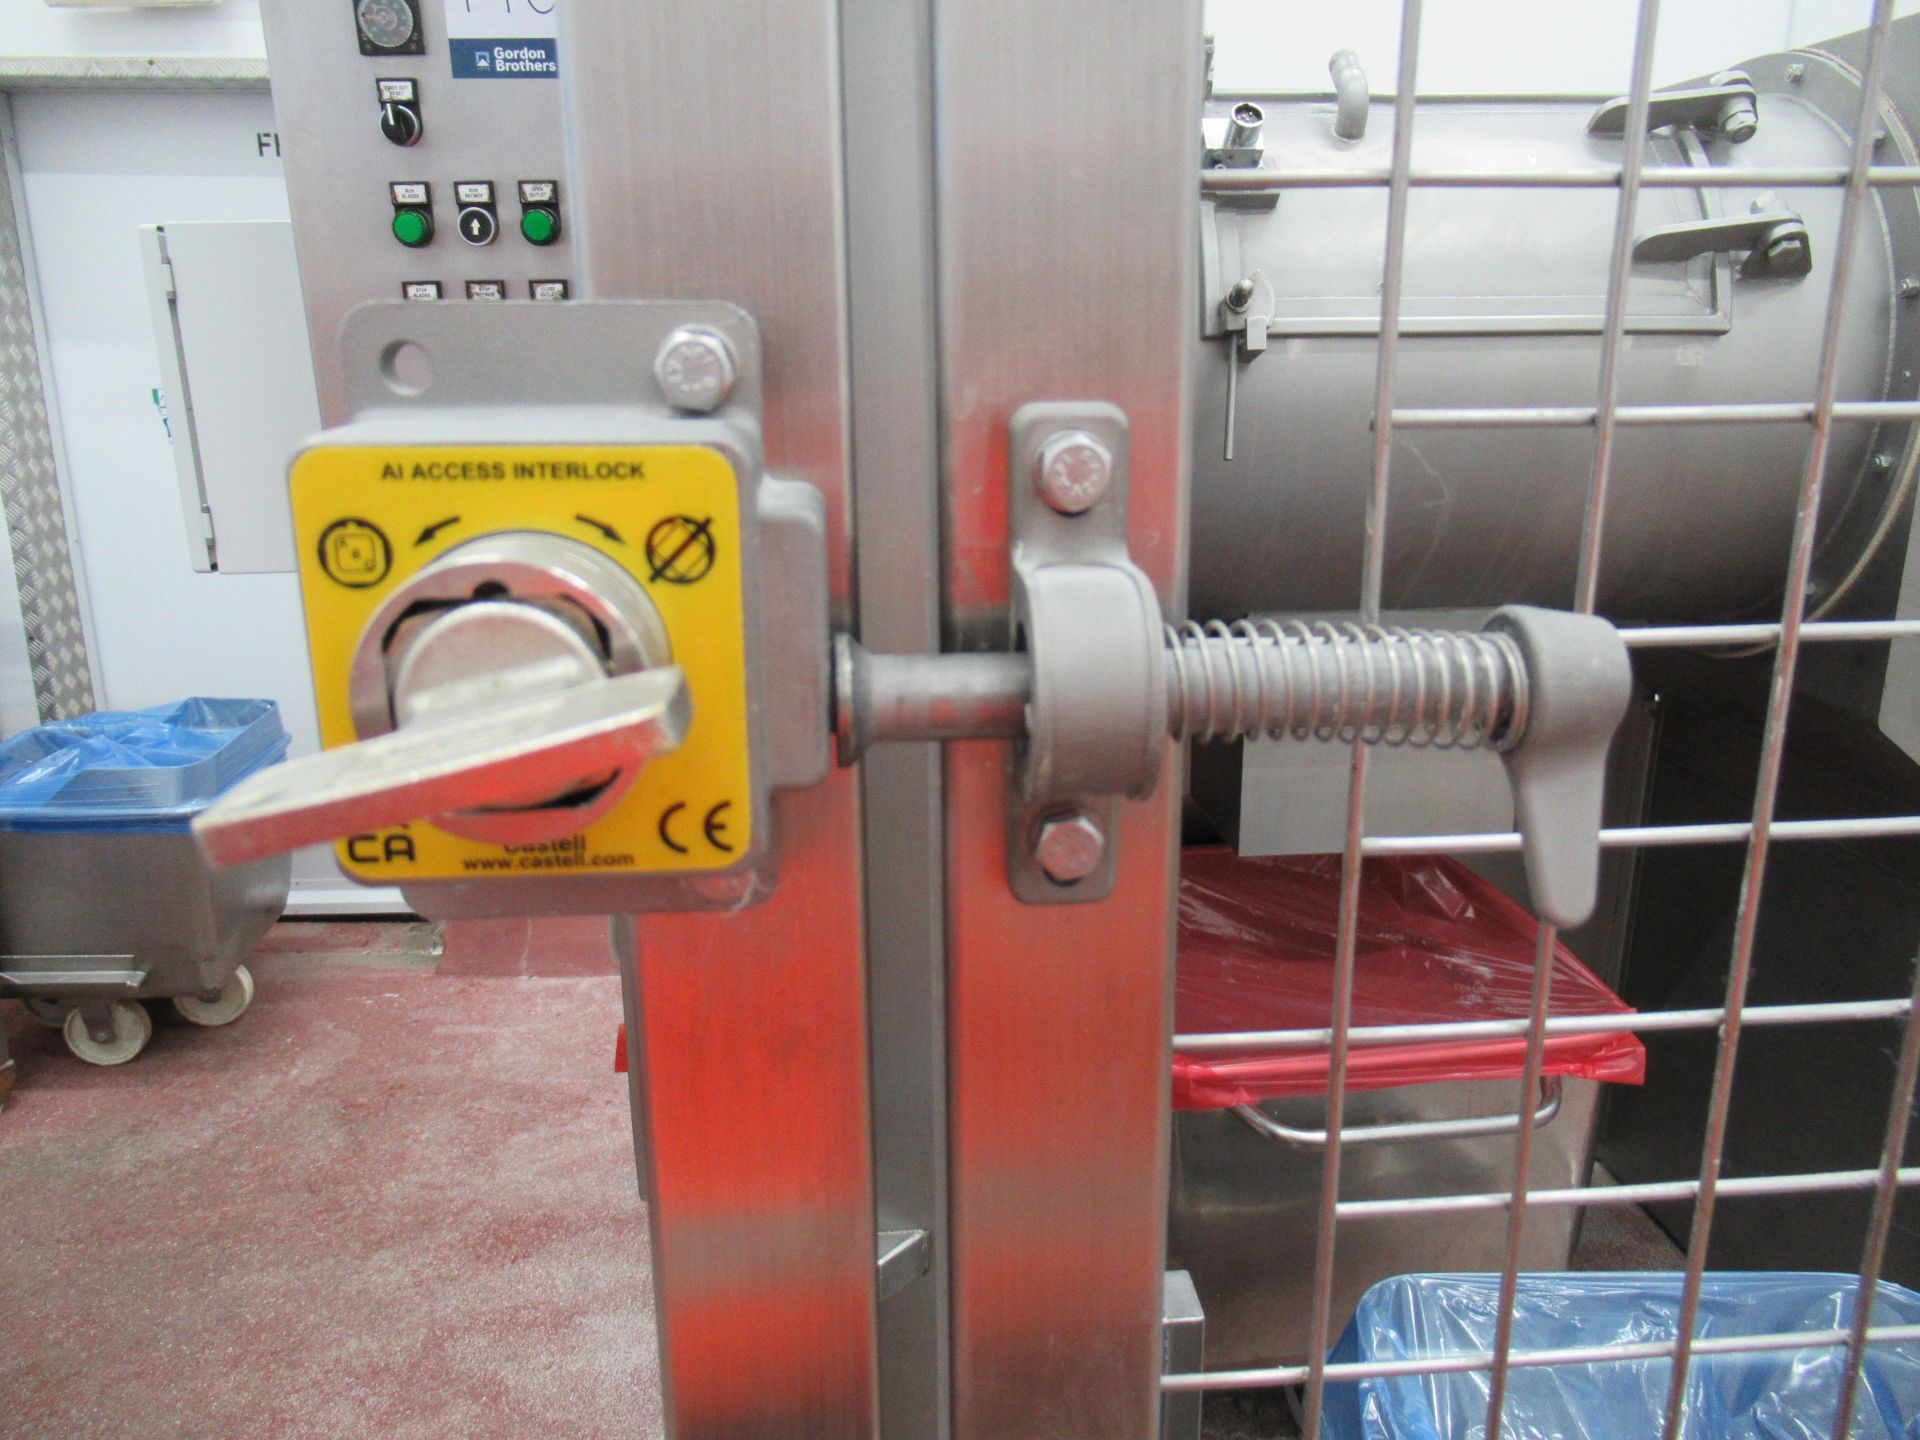 Winkworth RT200 stainless steel mixer Serial no: 16497 (2001) tare weight 1080kg, with fixed Base - Image 12 of 14